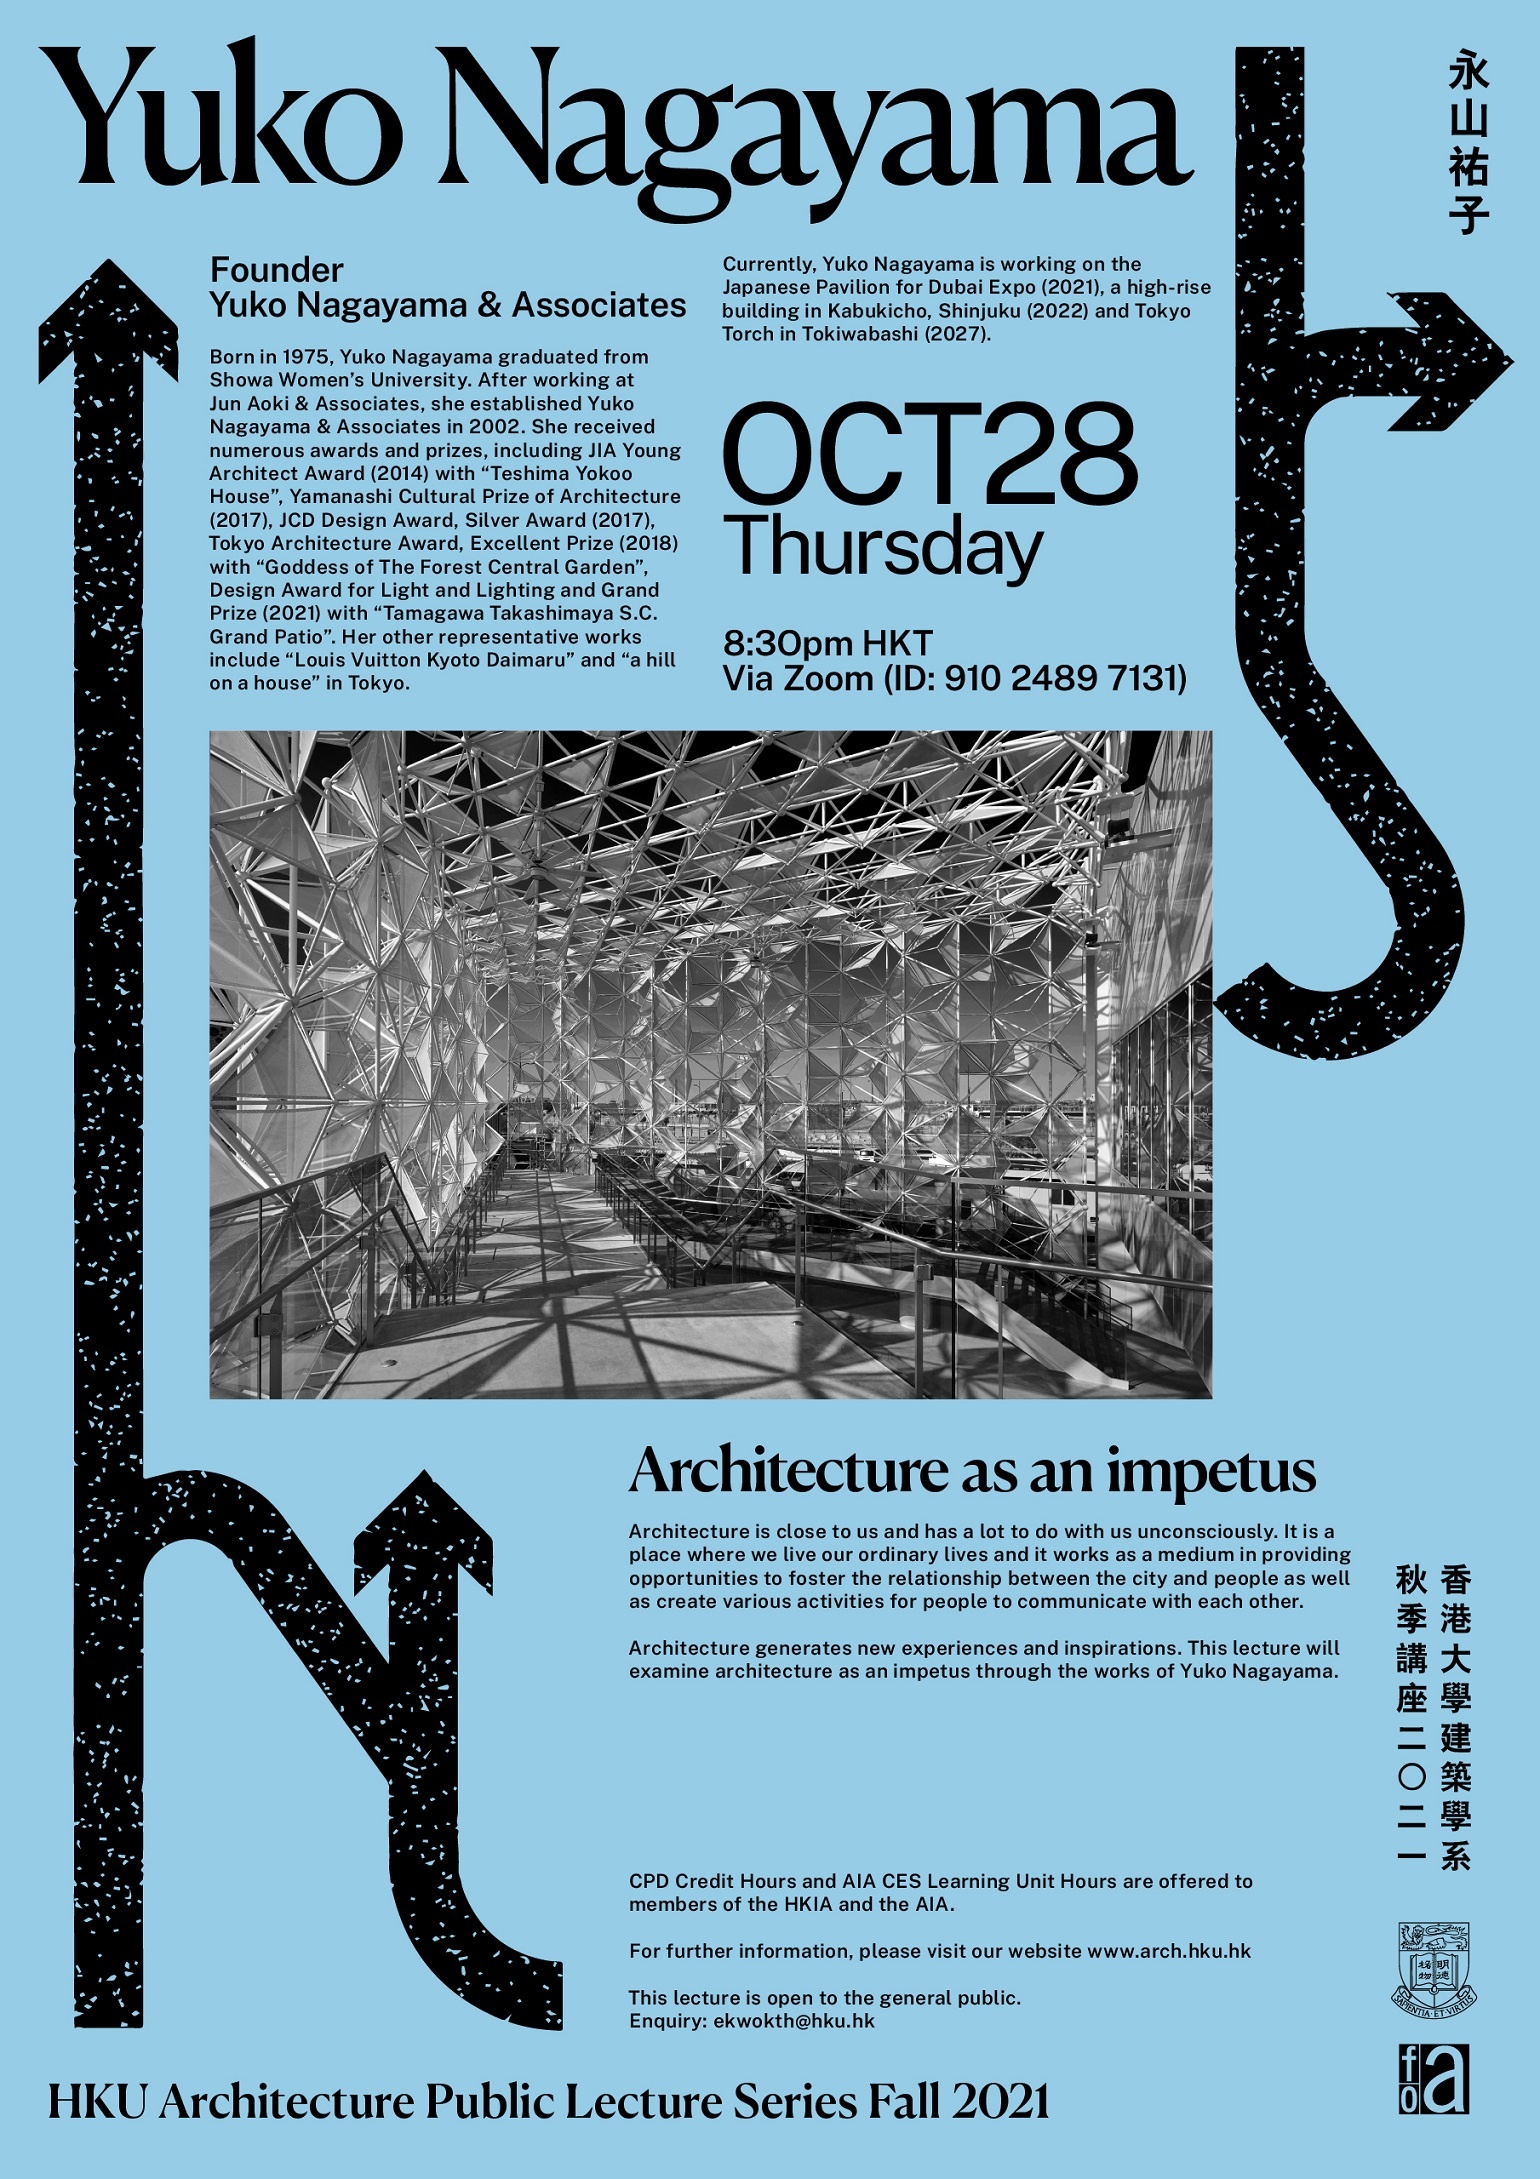 Public Lecture: 'Architecture as an impetus' by Yuko Nagayama 永山祐子